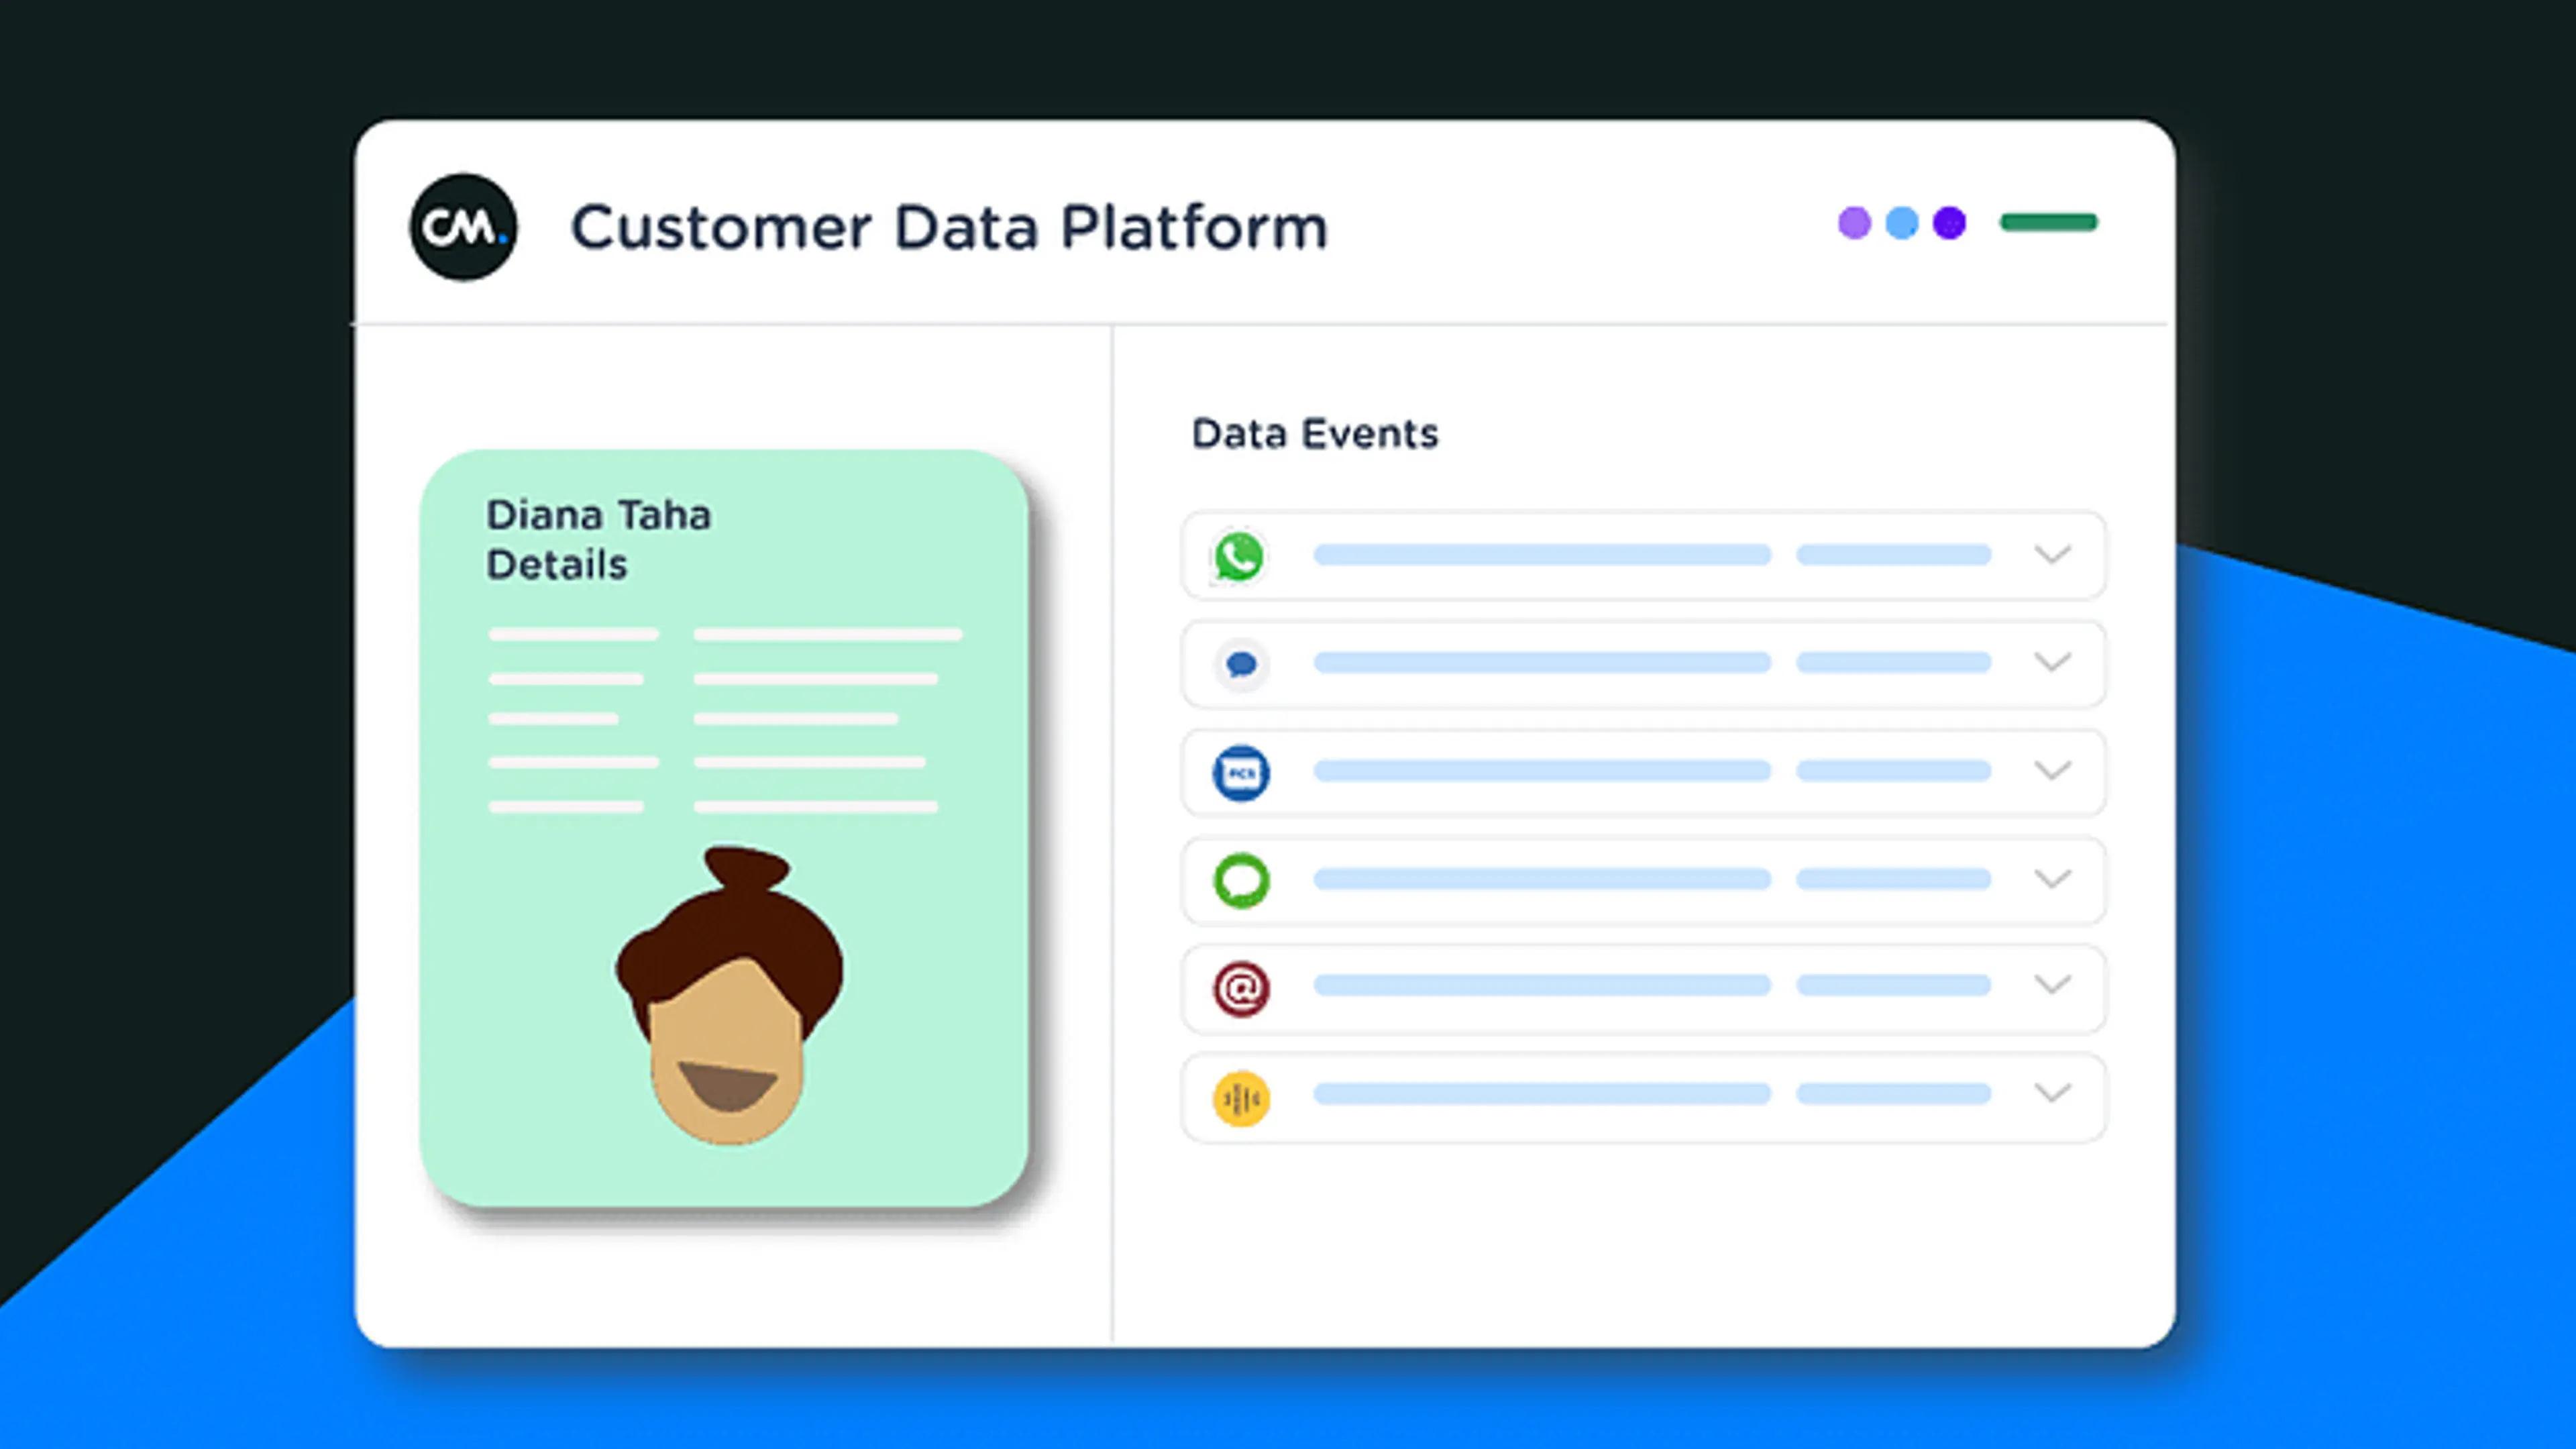 How Customer Data Platform unifies data to help brands offer better customer experiences and personalisation